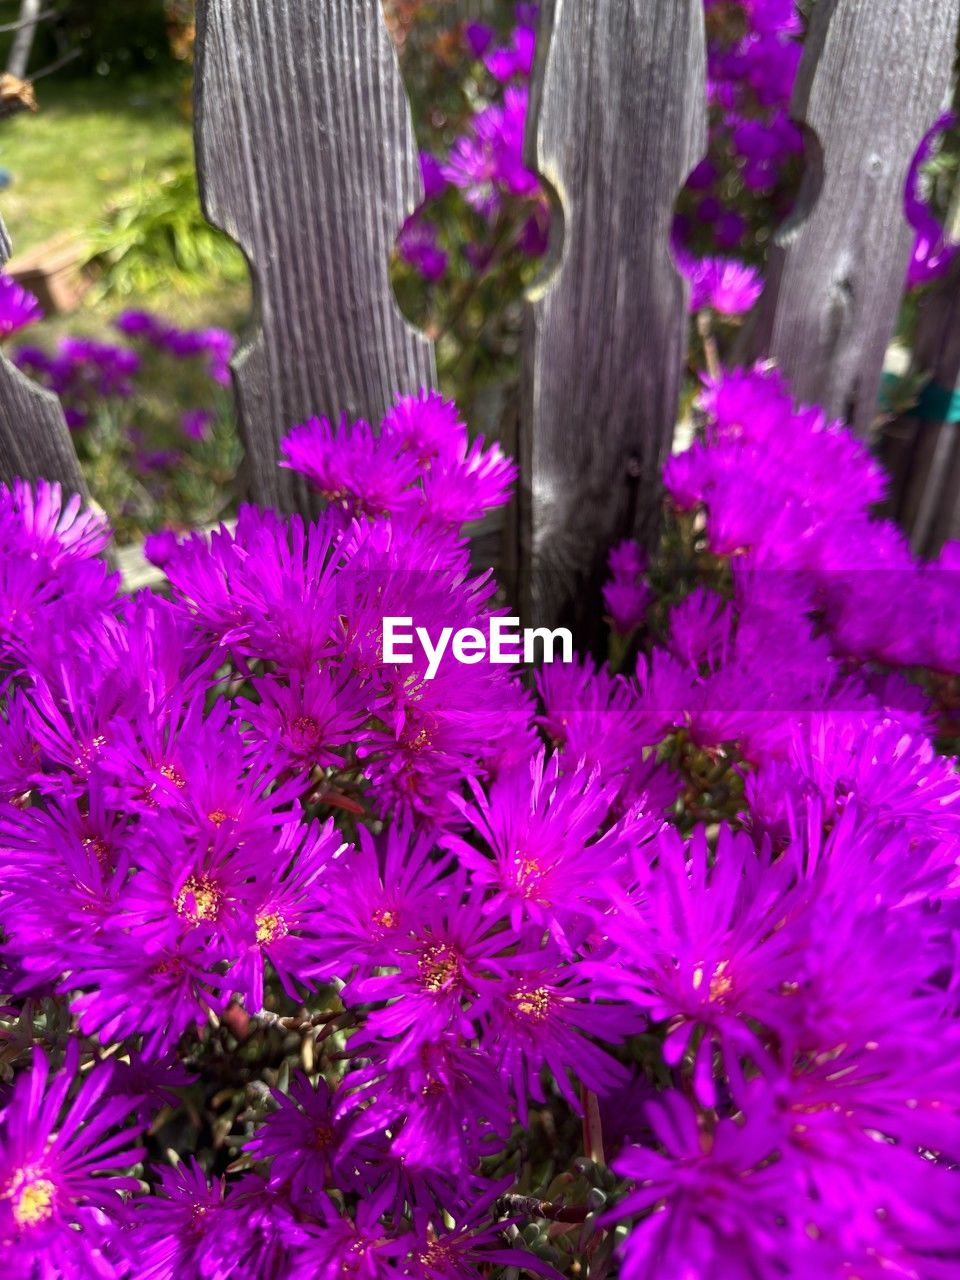 plant, flower, flowering plant, growth, freshness, beauty in nature, nature, purple, close-up, fragility, day, pink, no people, outdoors, flower head, petal, inflorescence, wildflower, blossom, springtime, land, field